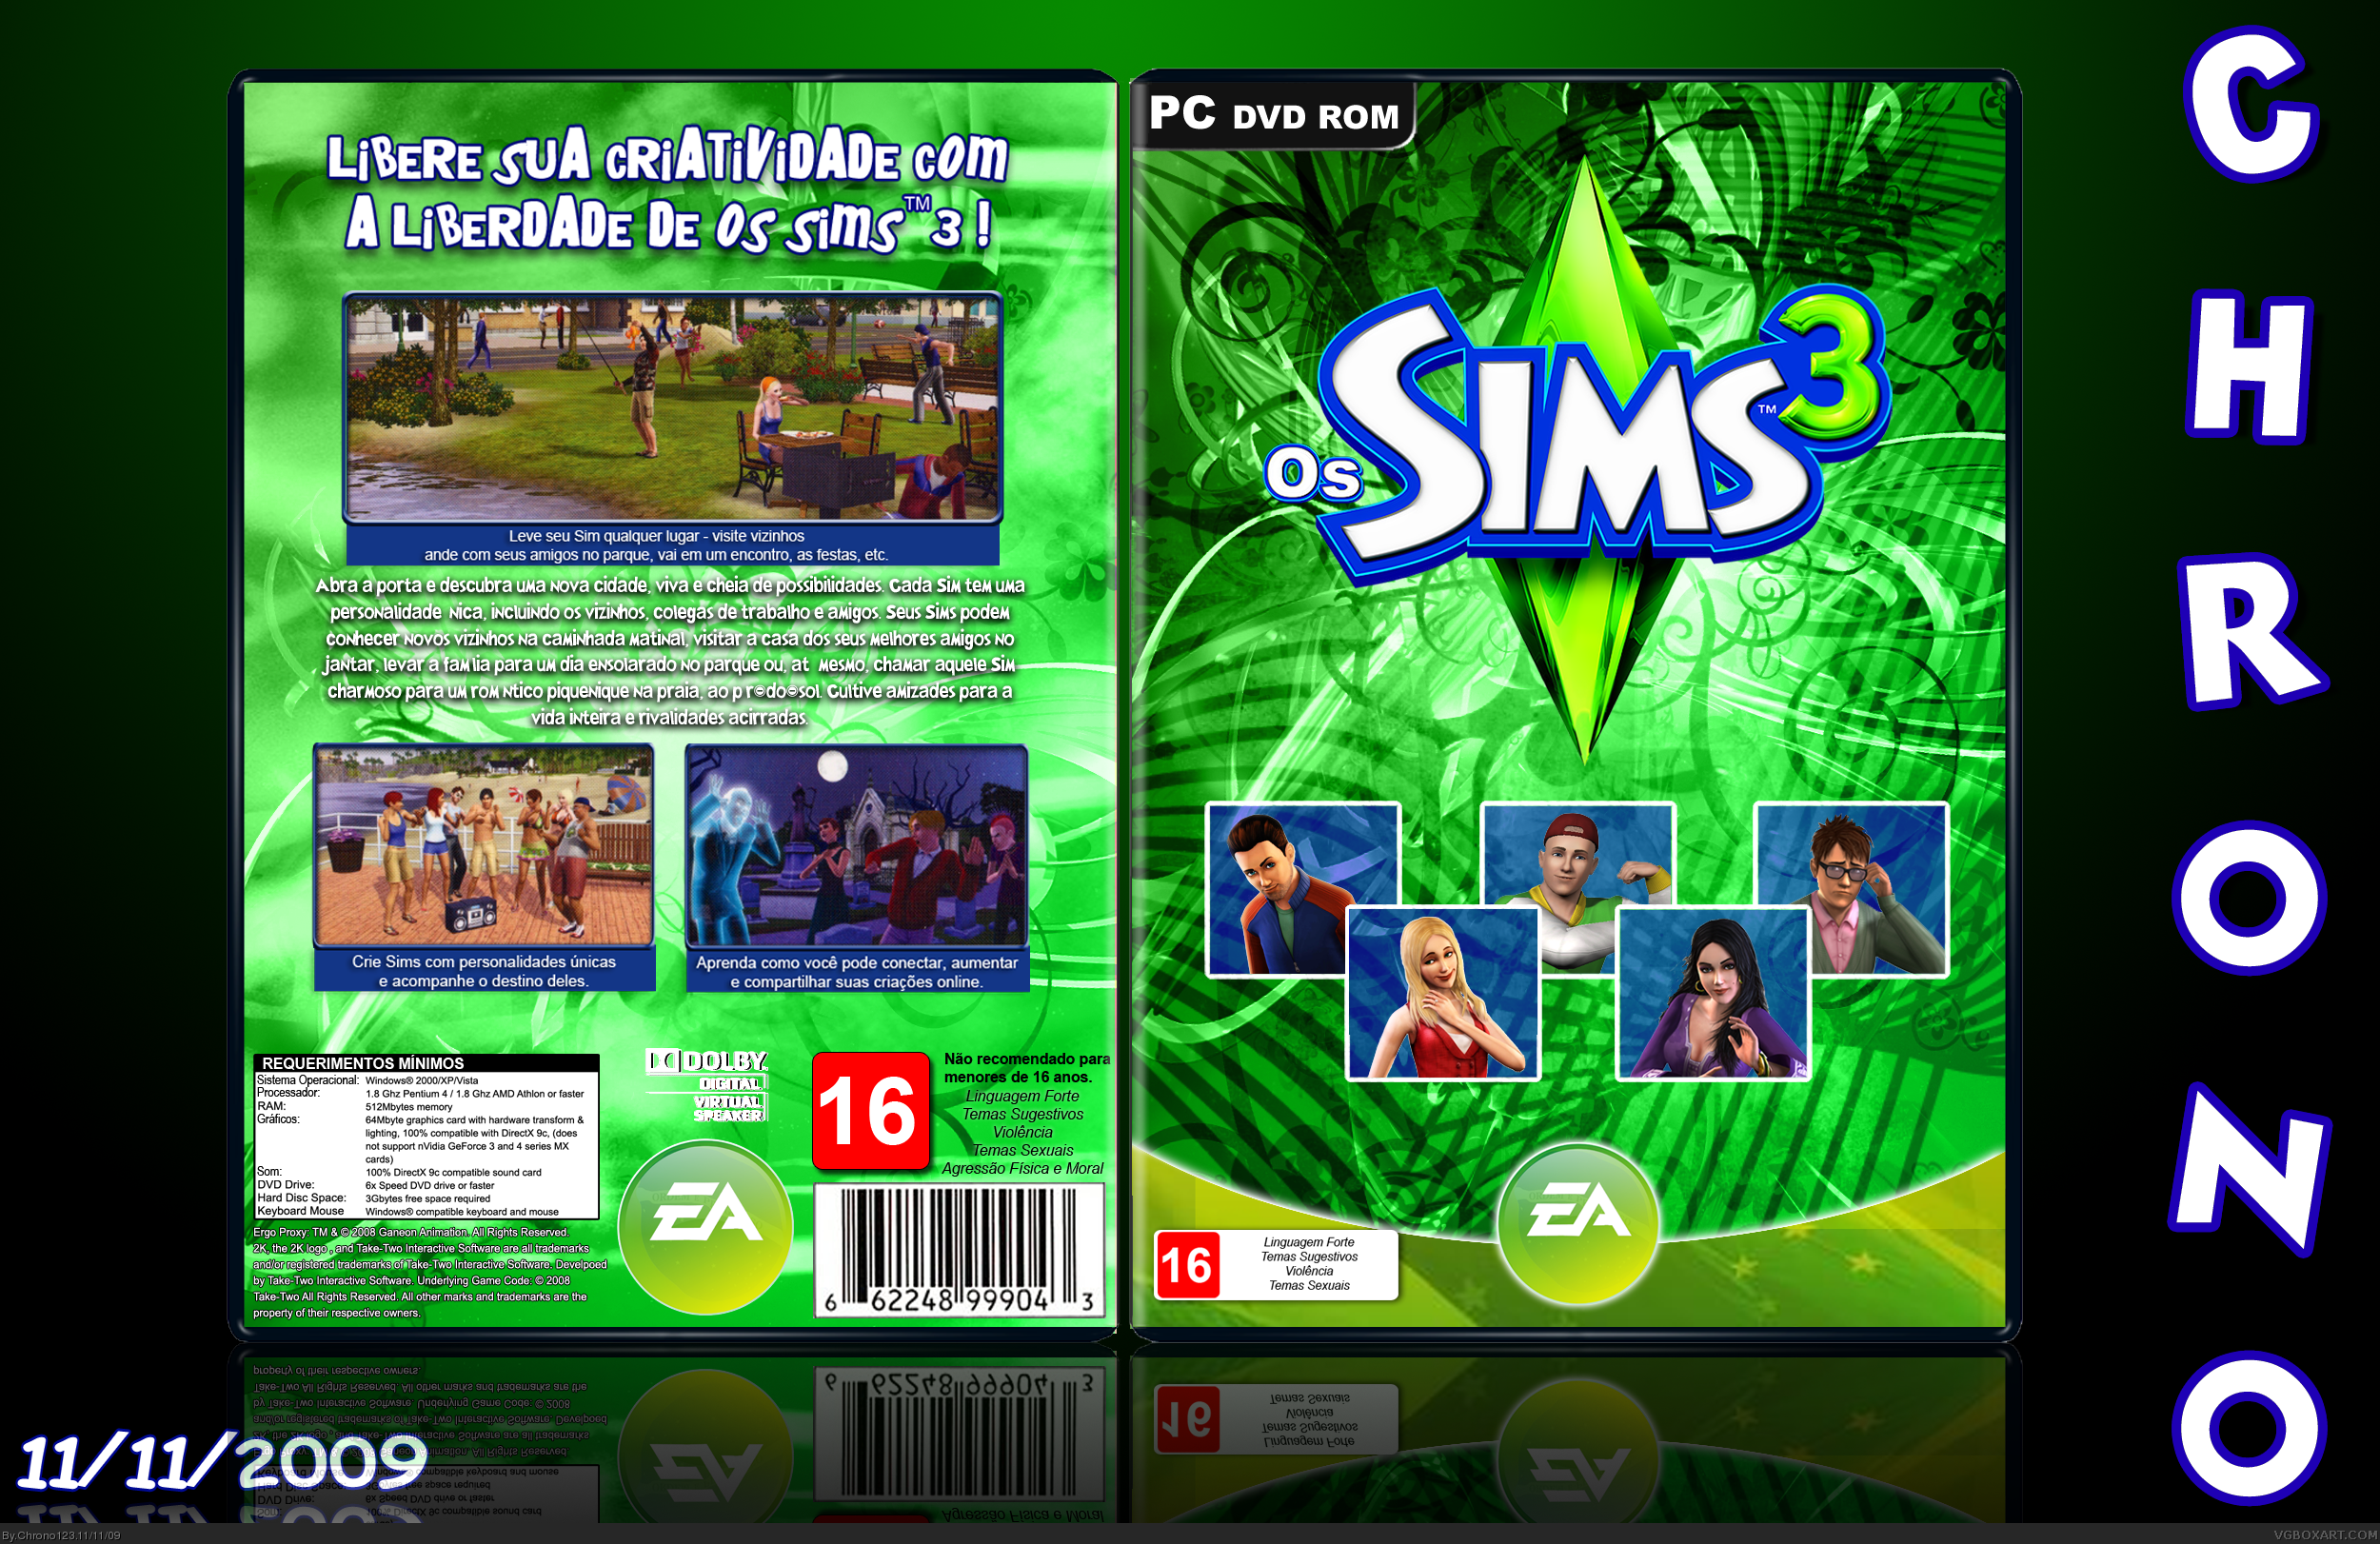 The Sims 3 box cover